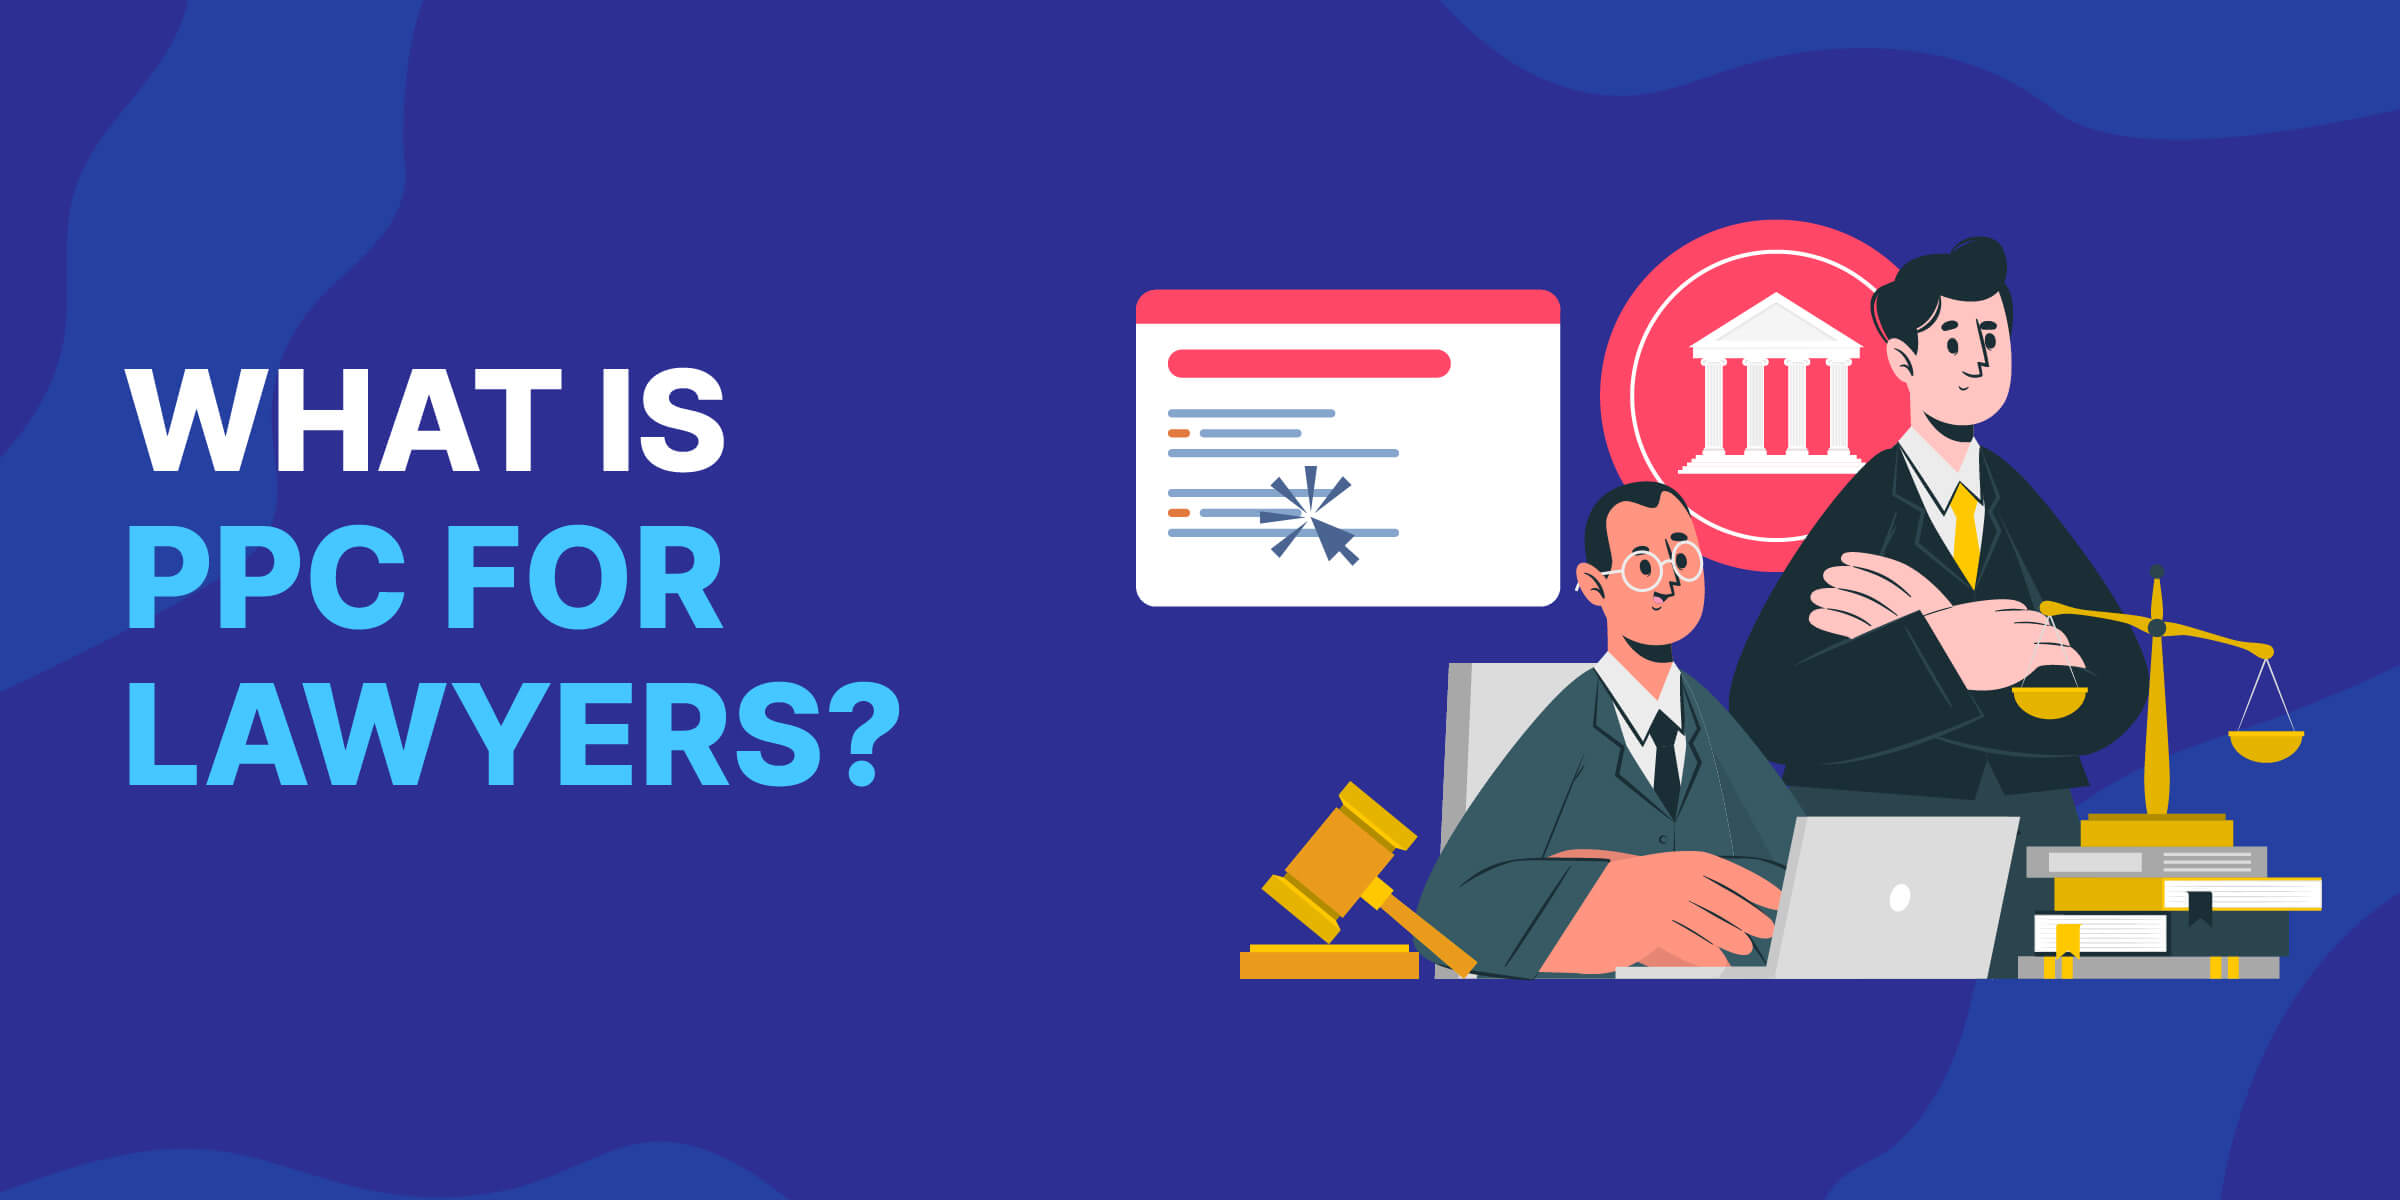 What Is PPC for Lawyers